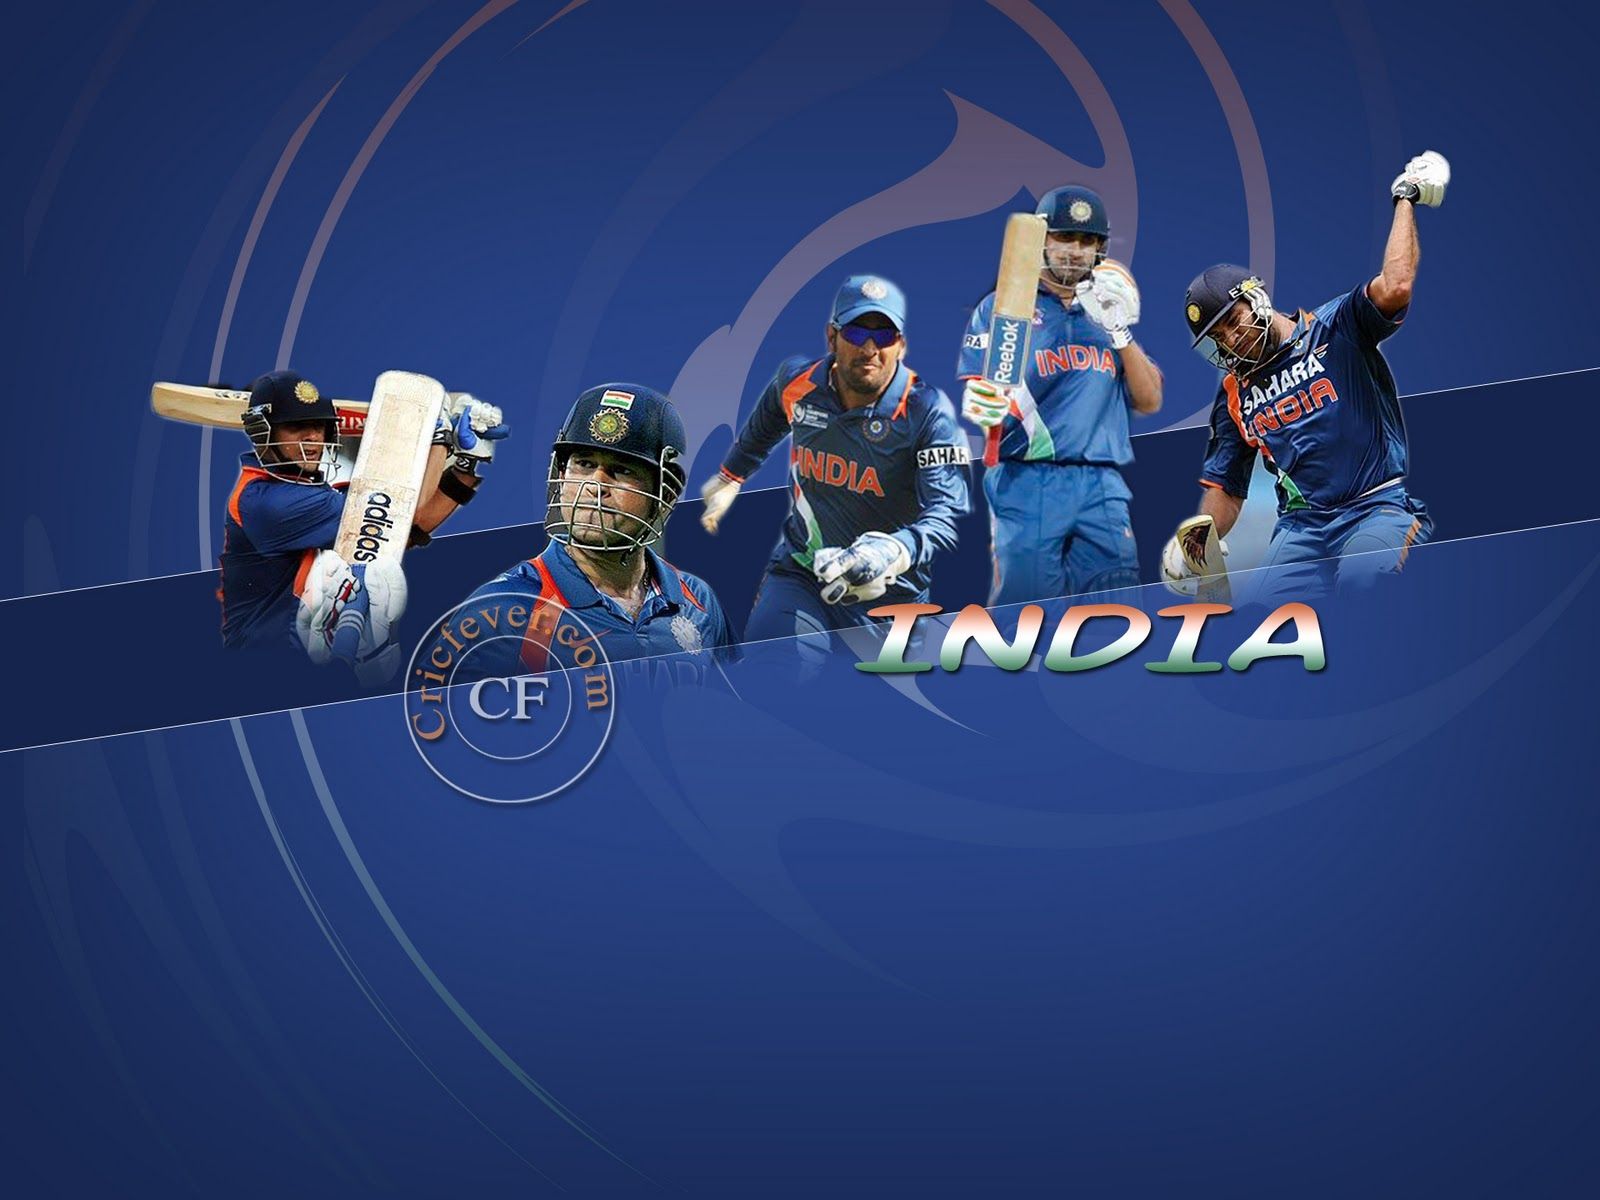 Team_India for icc world cup wallpaper